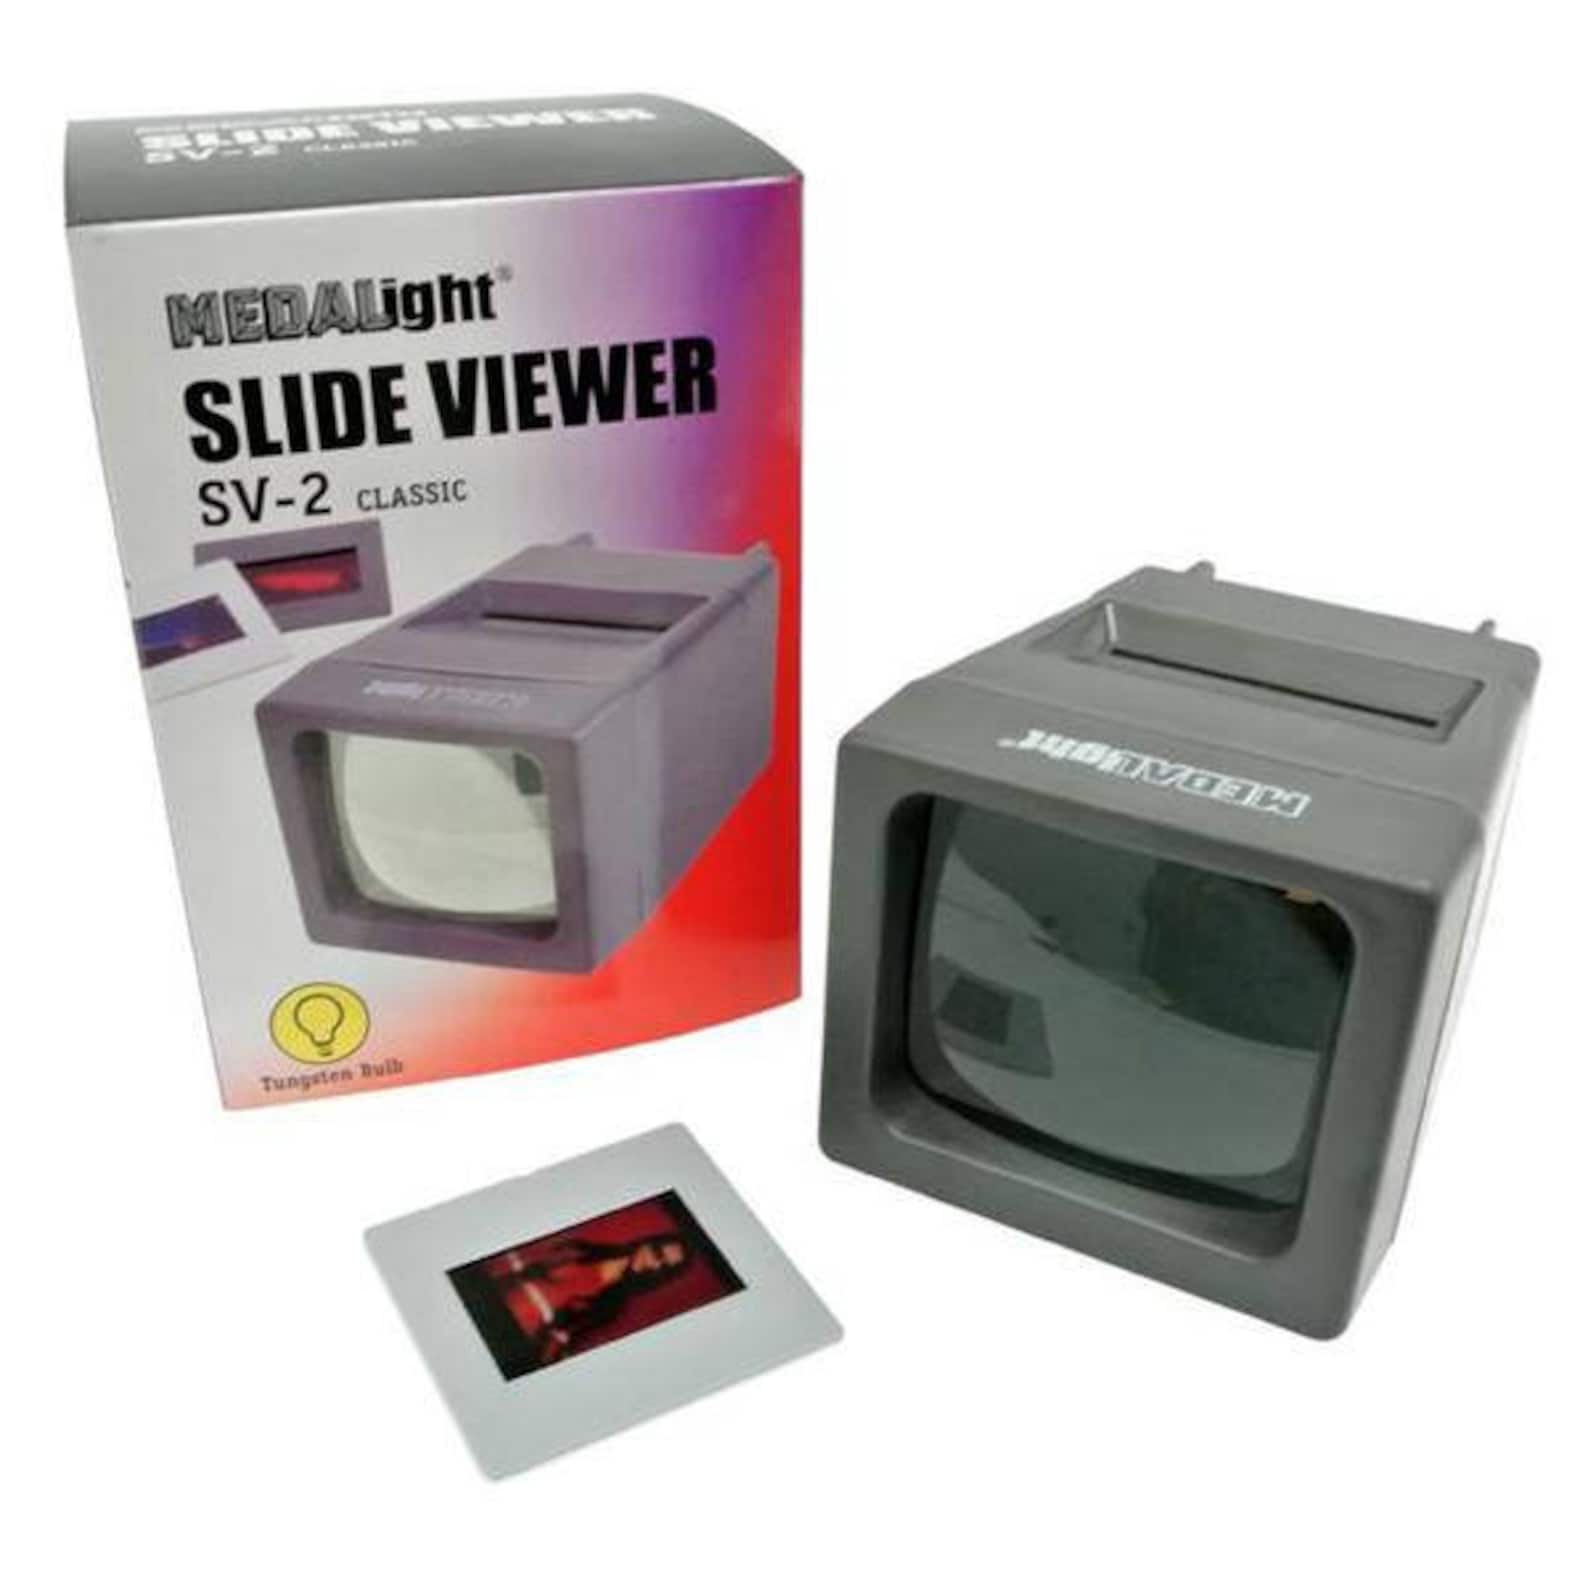 Medalight SV-2 35mm, 2x2 LED Compact Slide Viewer -2x Magnification Indipro 